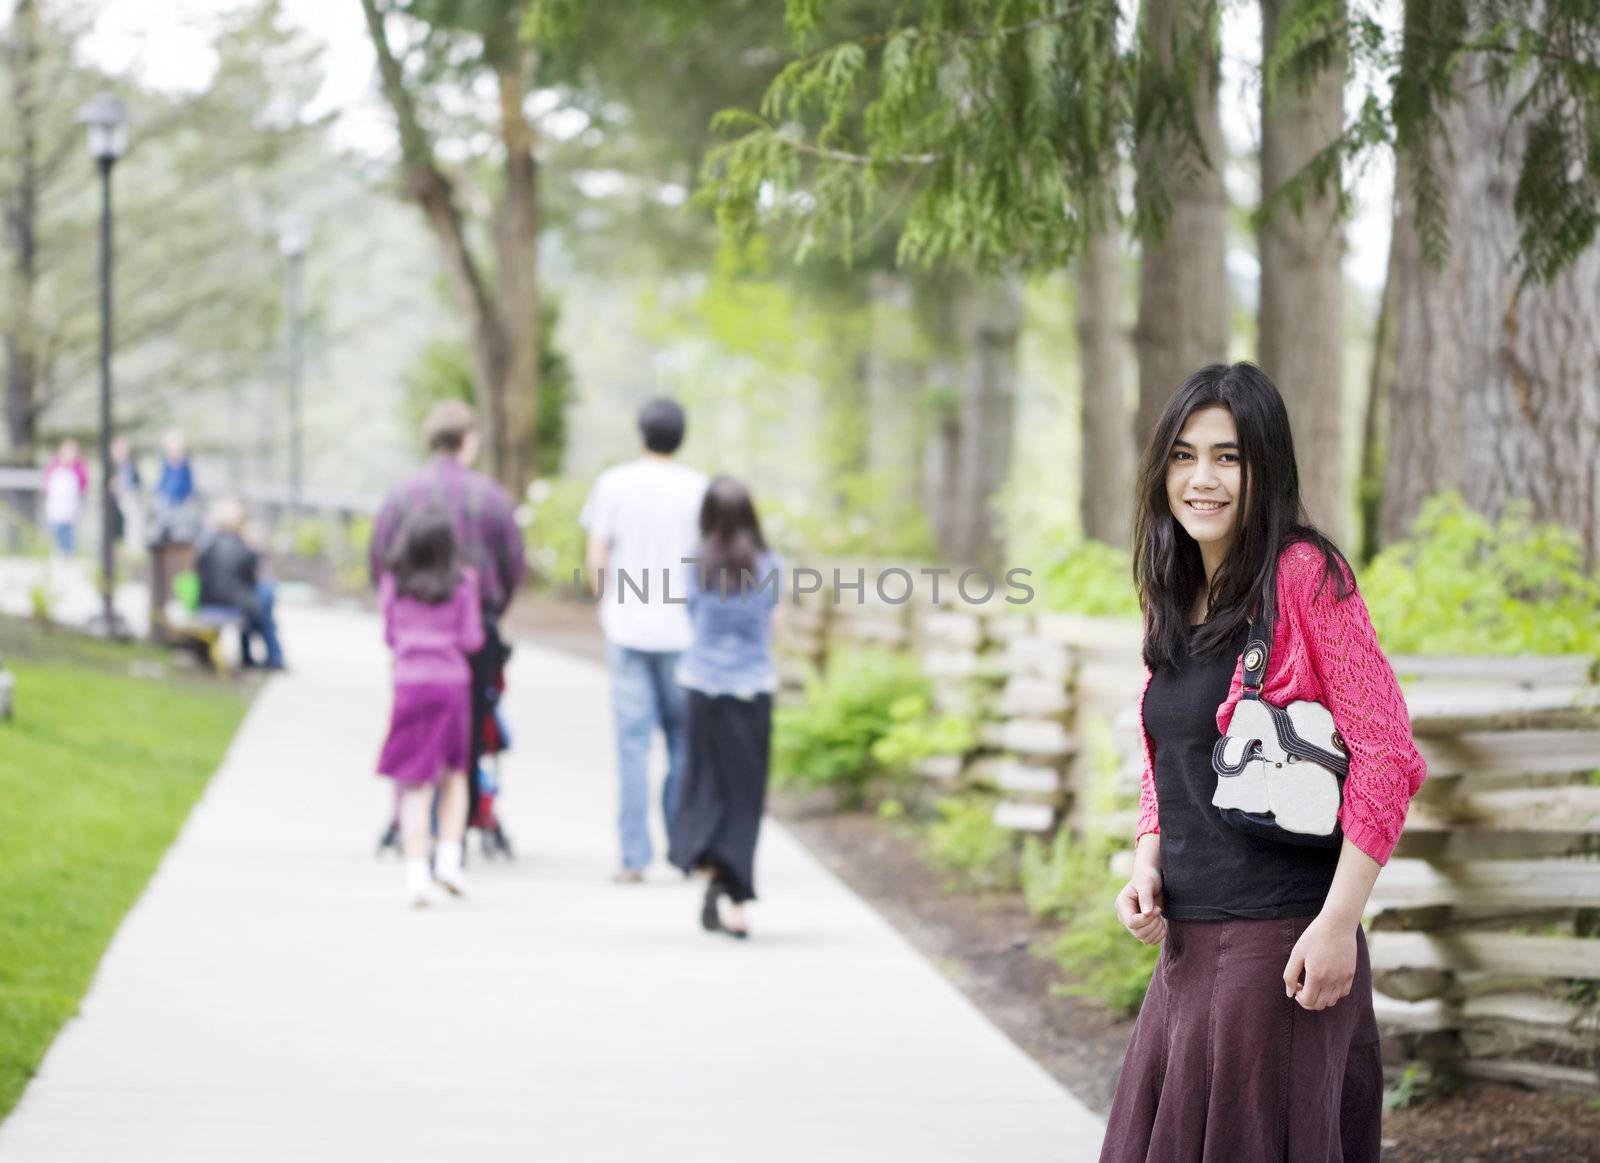 Young teen or woman out on walk with family